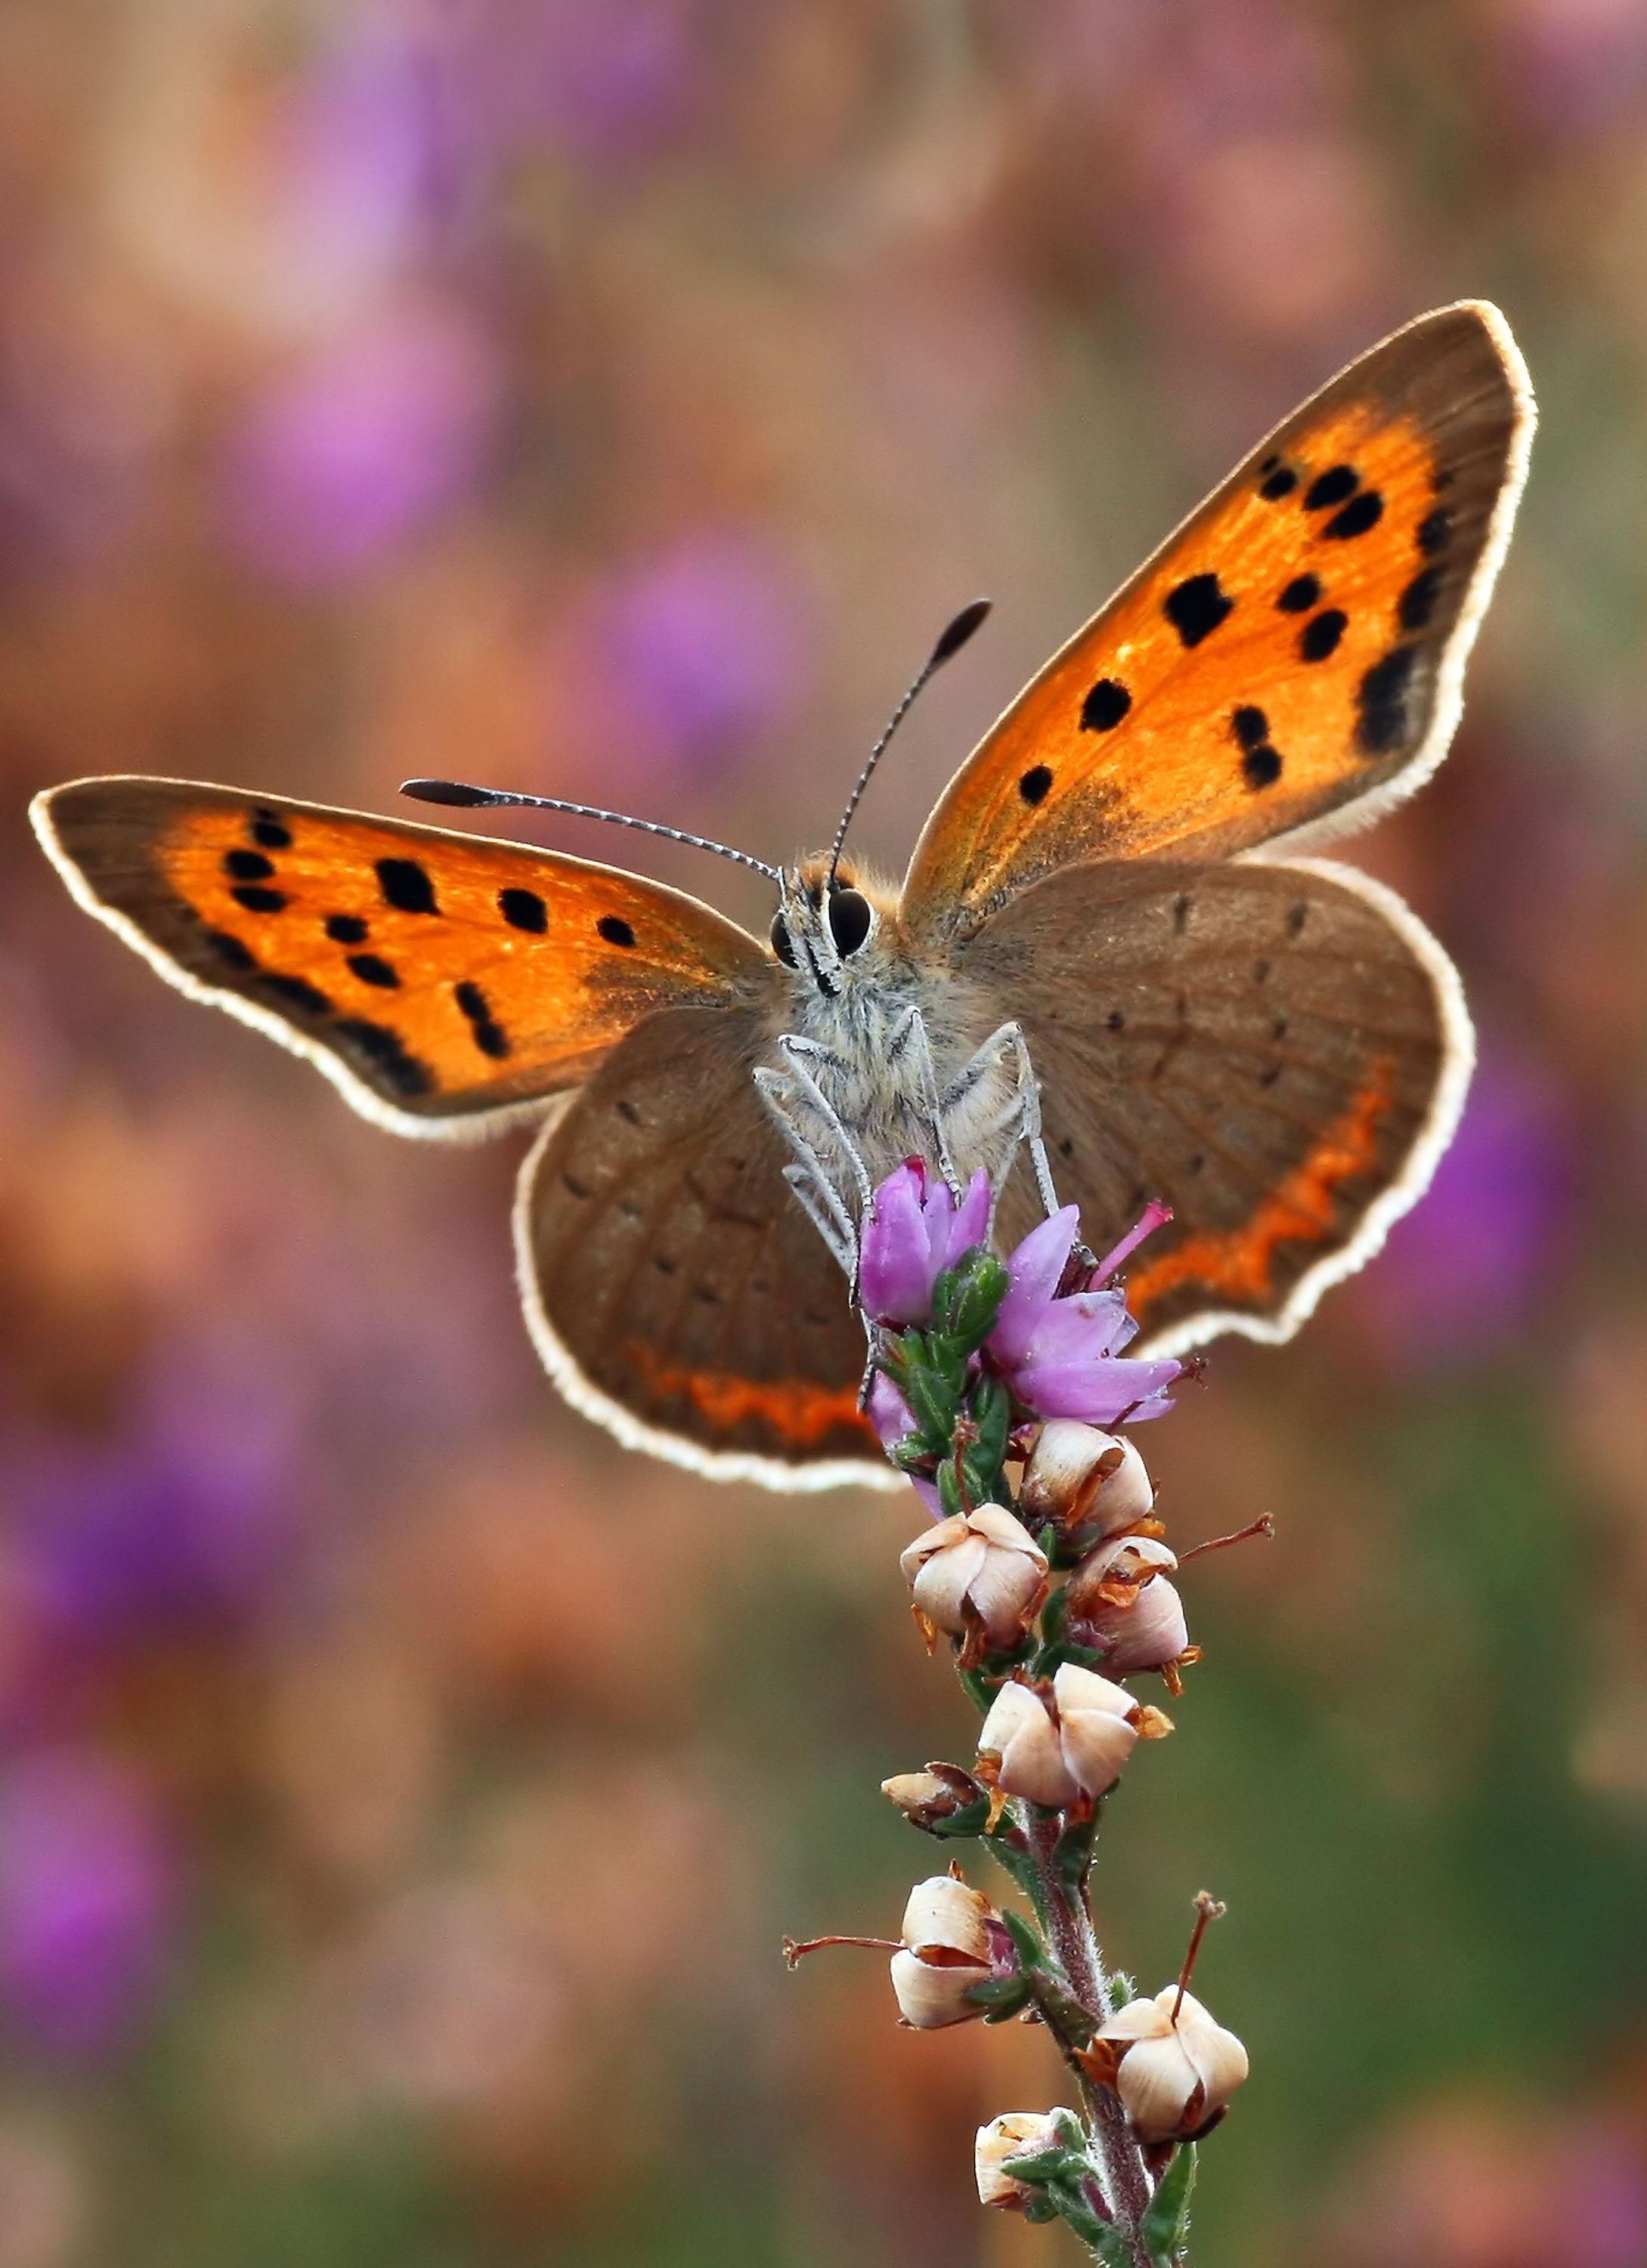 Small copper butterfly in 'inexorable decline' according to survey ...